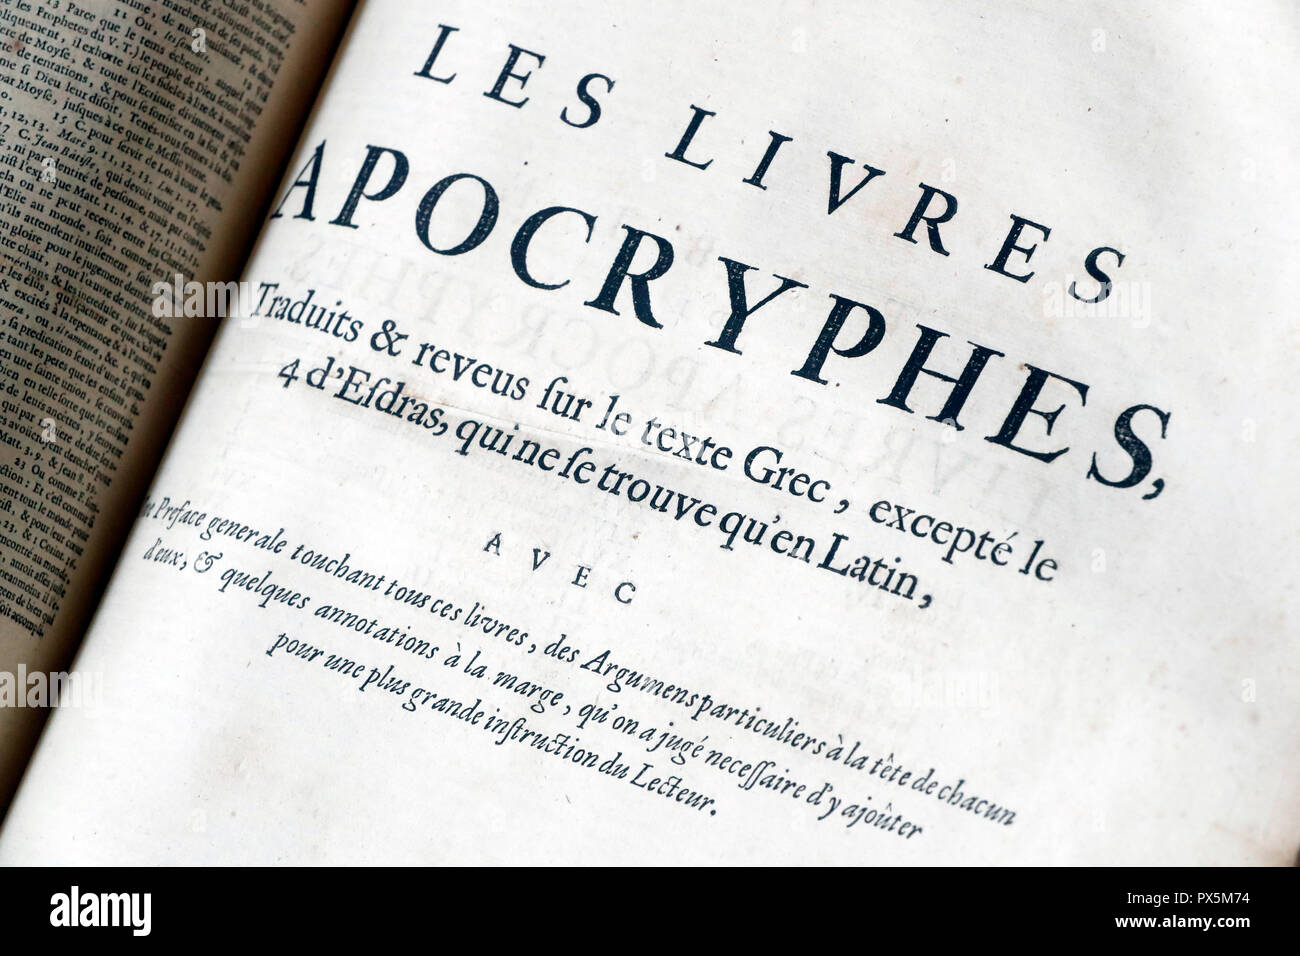 Old bible in French, 1669.  Old Testament. Apocrypha. Stock Photo